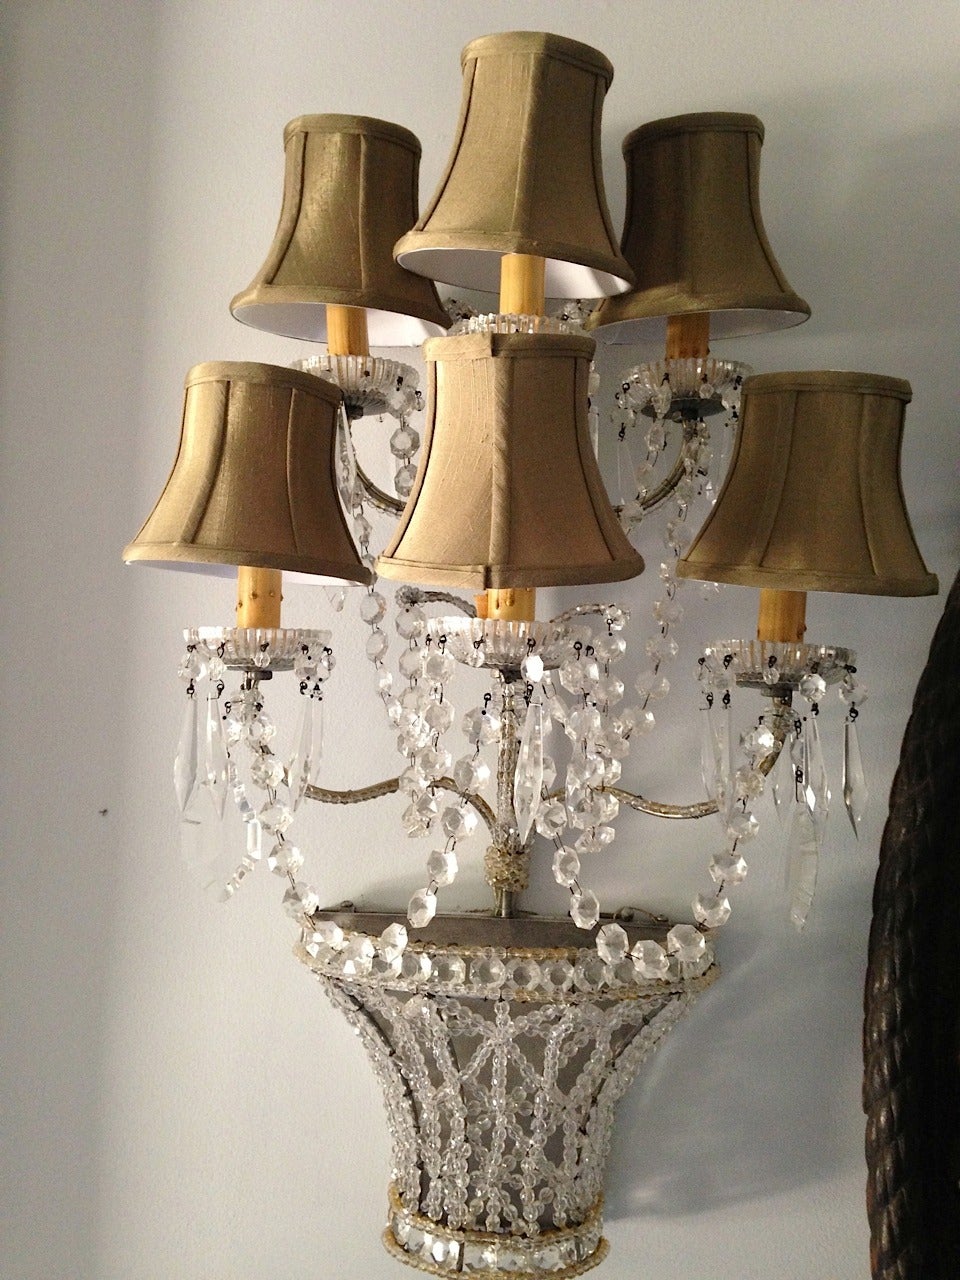 Pair of Venetian Sconces Tony Duquette Style, Hi-Glam Hollywood Regency For Sale